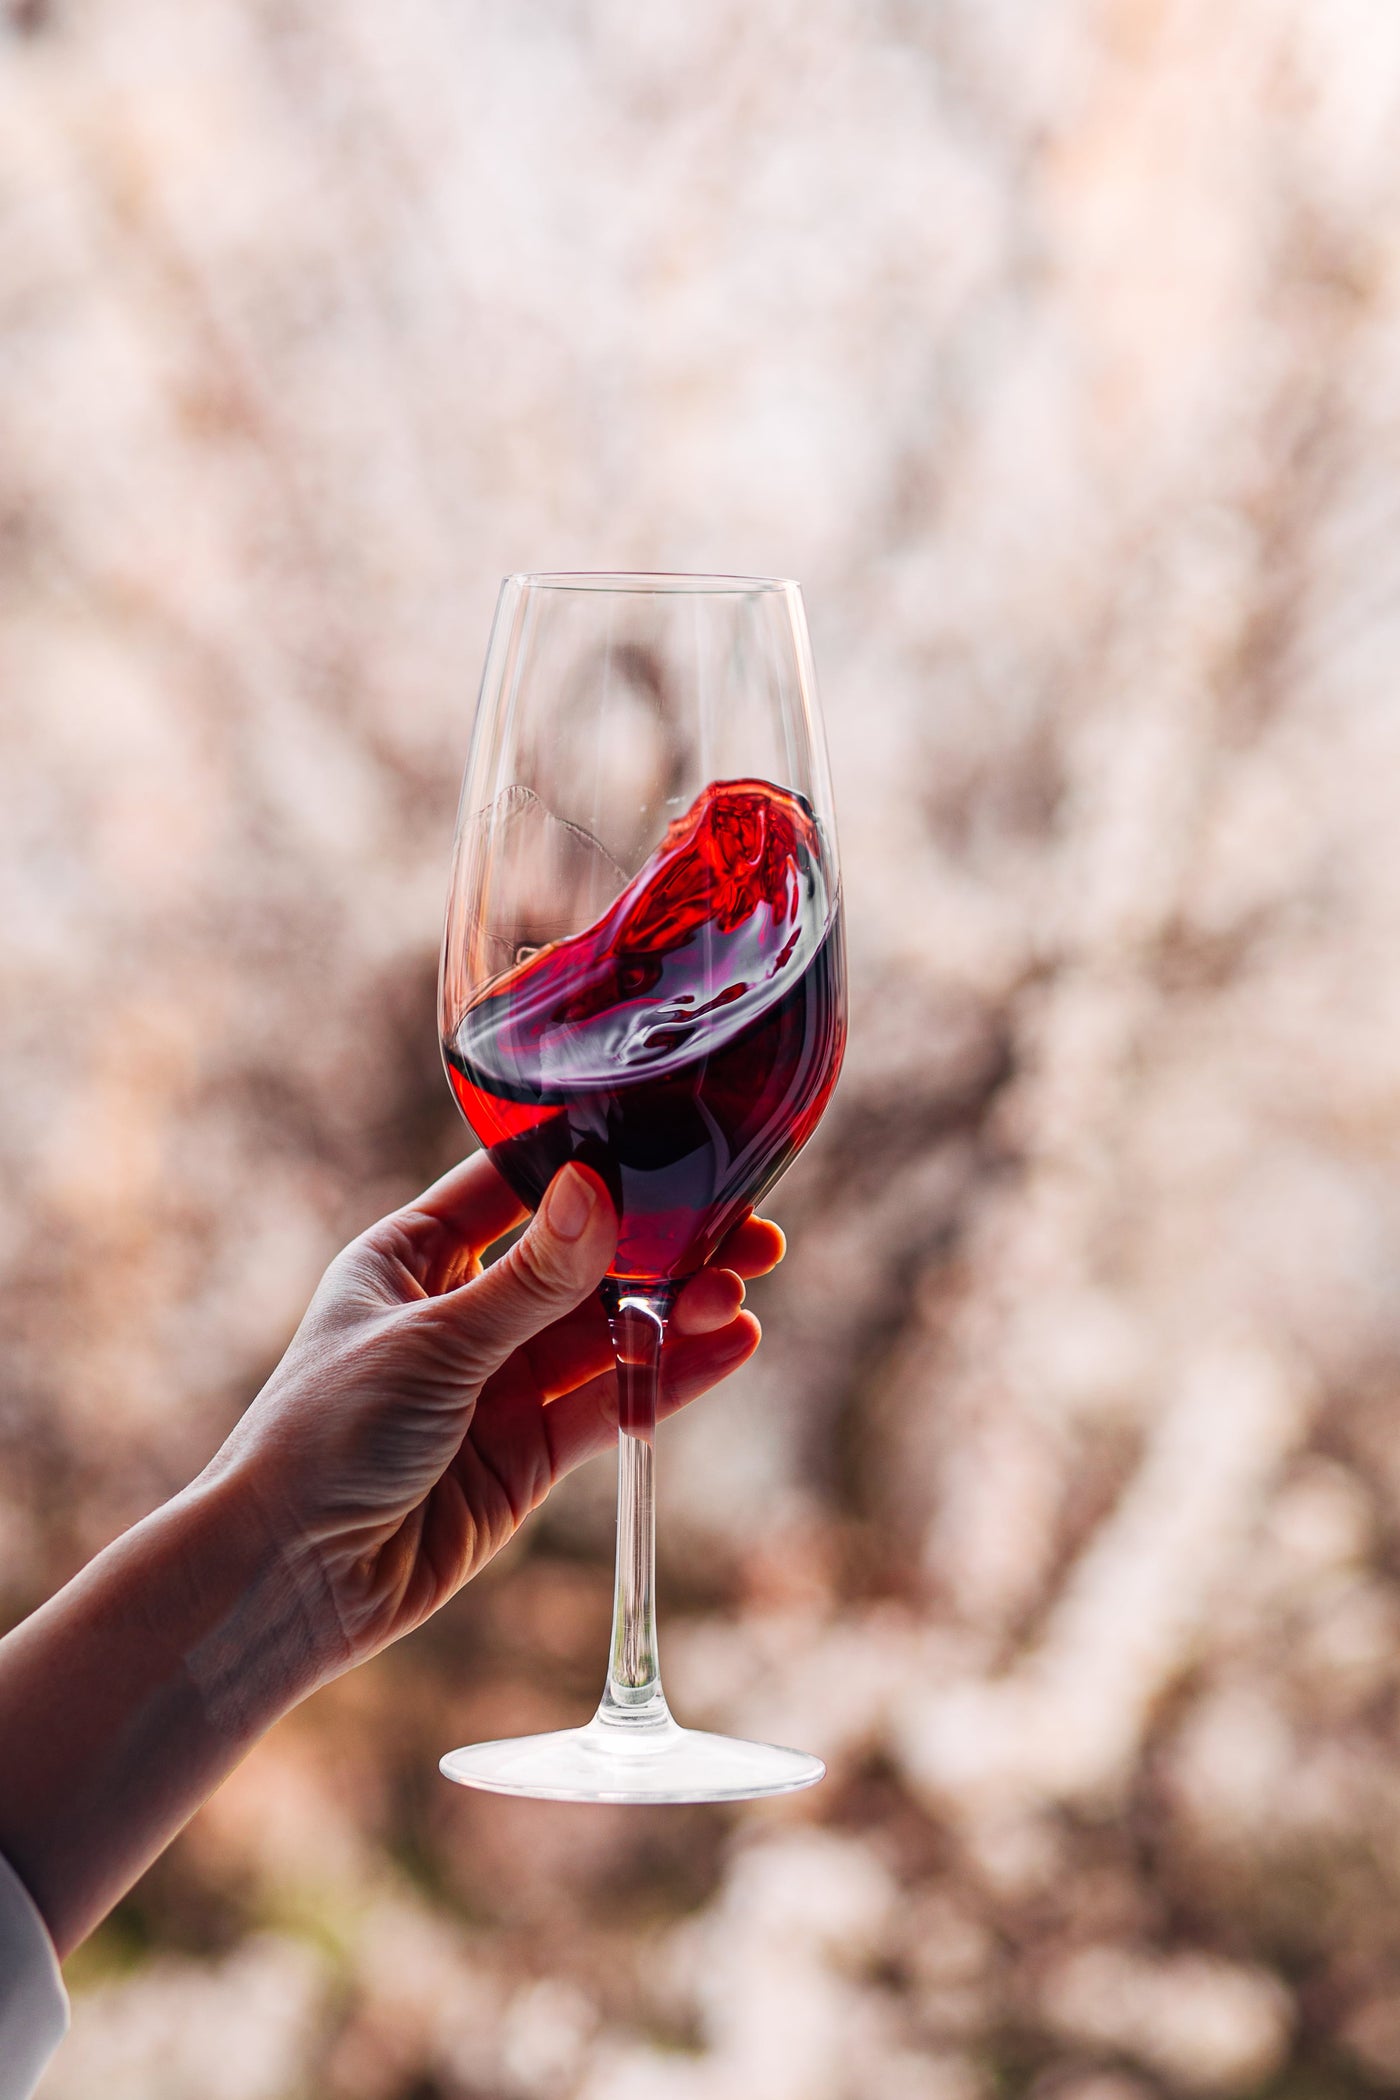 The Science Behind Tannins